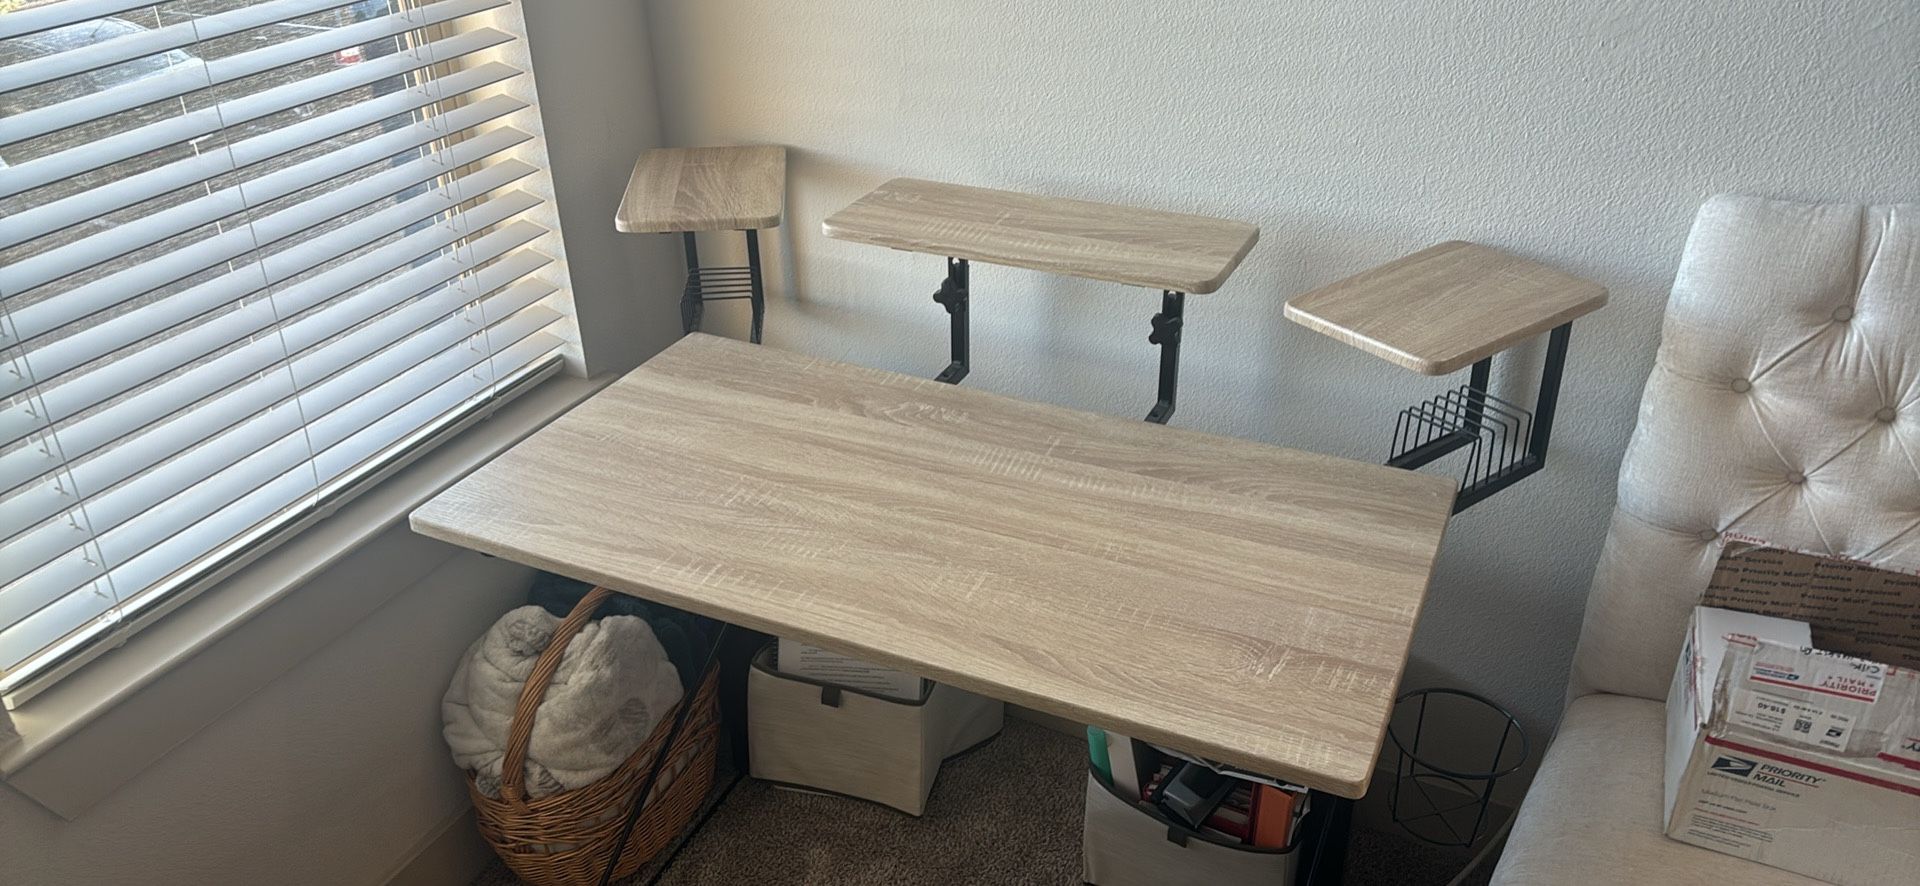 Desk with 3 Stands (Gaming, Music, Etc)